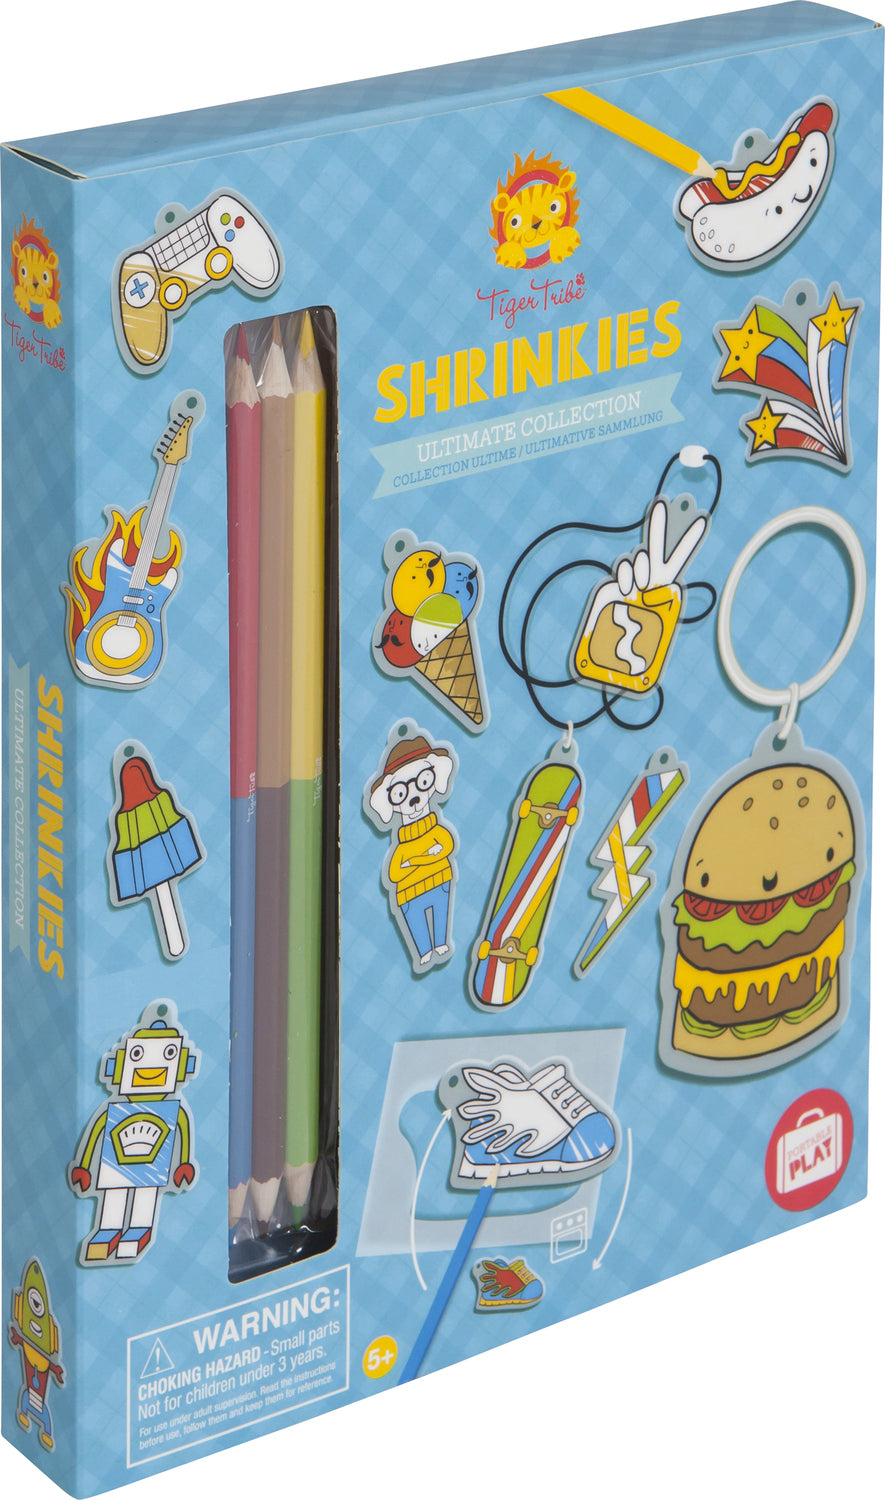 Shrinkies - Ultimate Collection